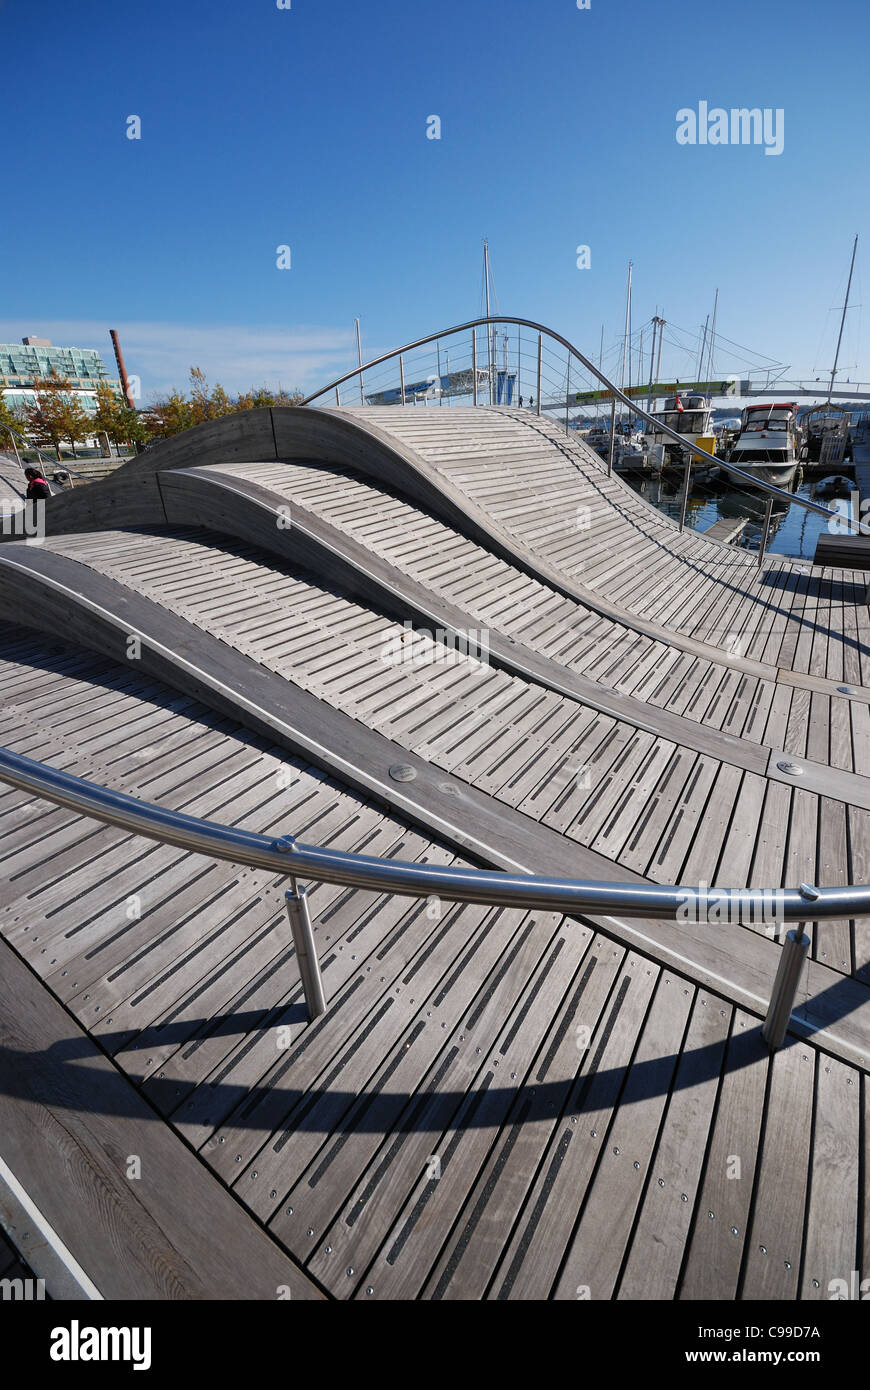 The Wave Deck an experiment in urban architecture installed at Harbourfront, a waterfront tourist area in Toronto Canada. Stock Photo